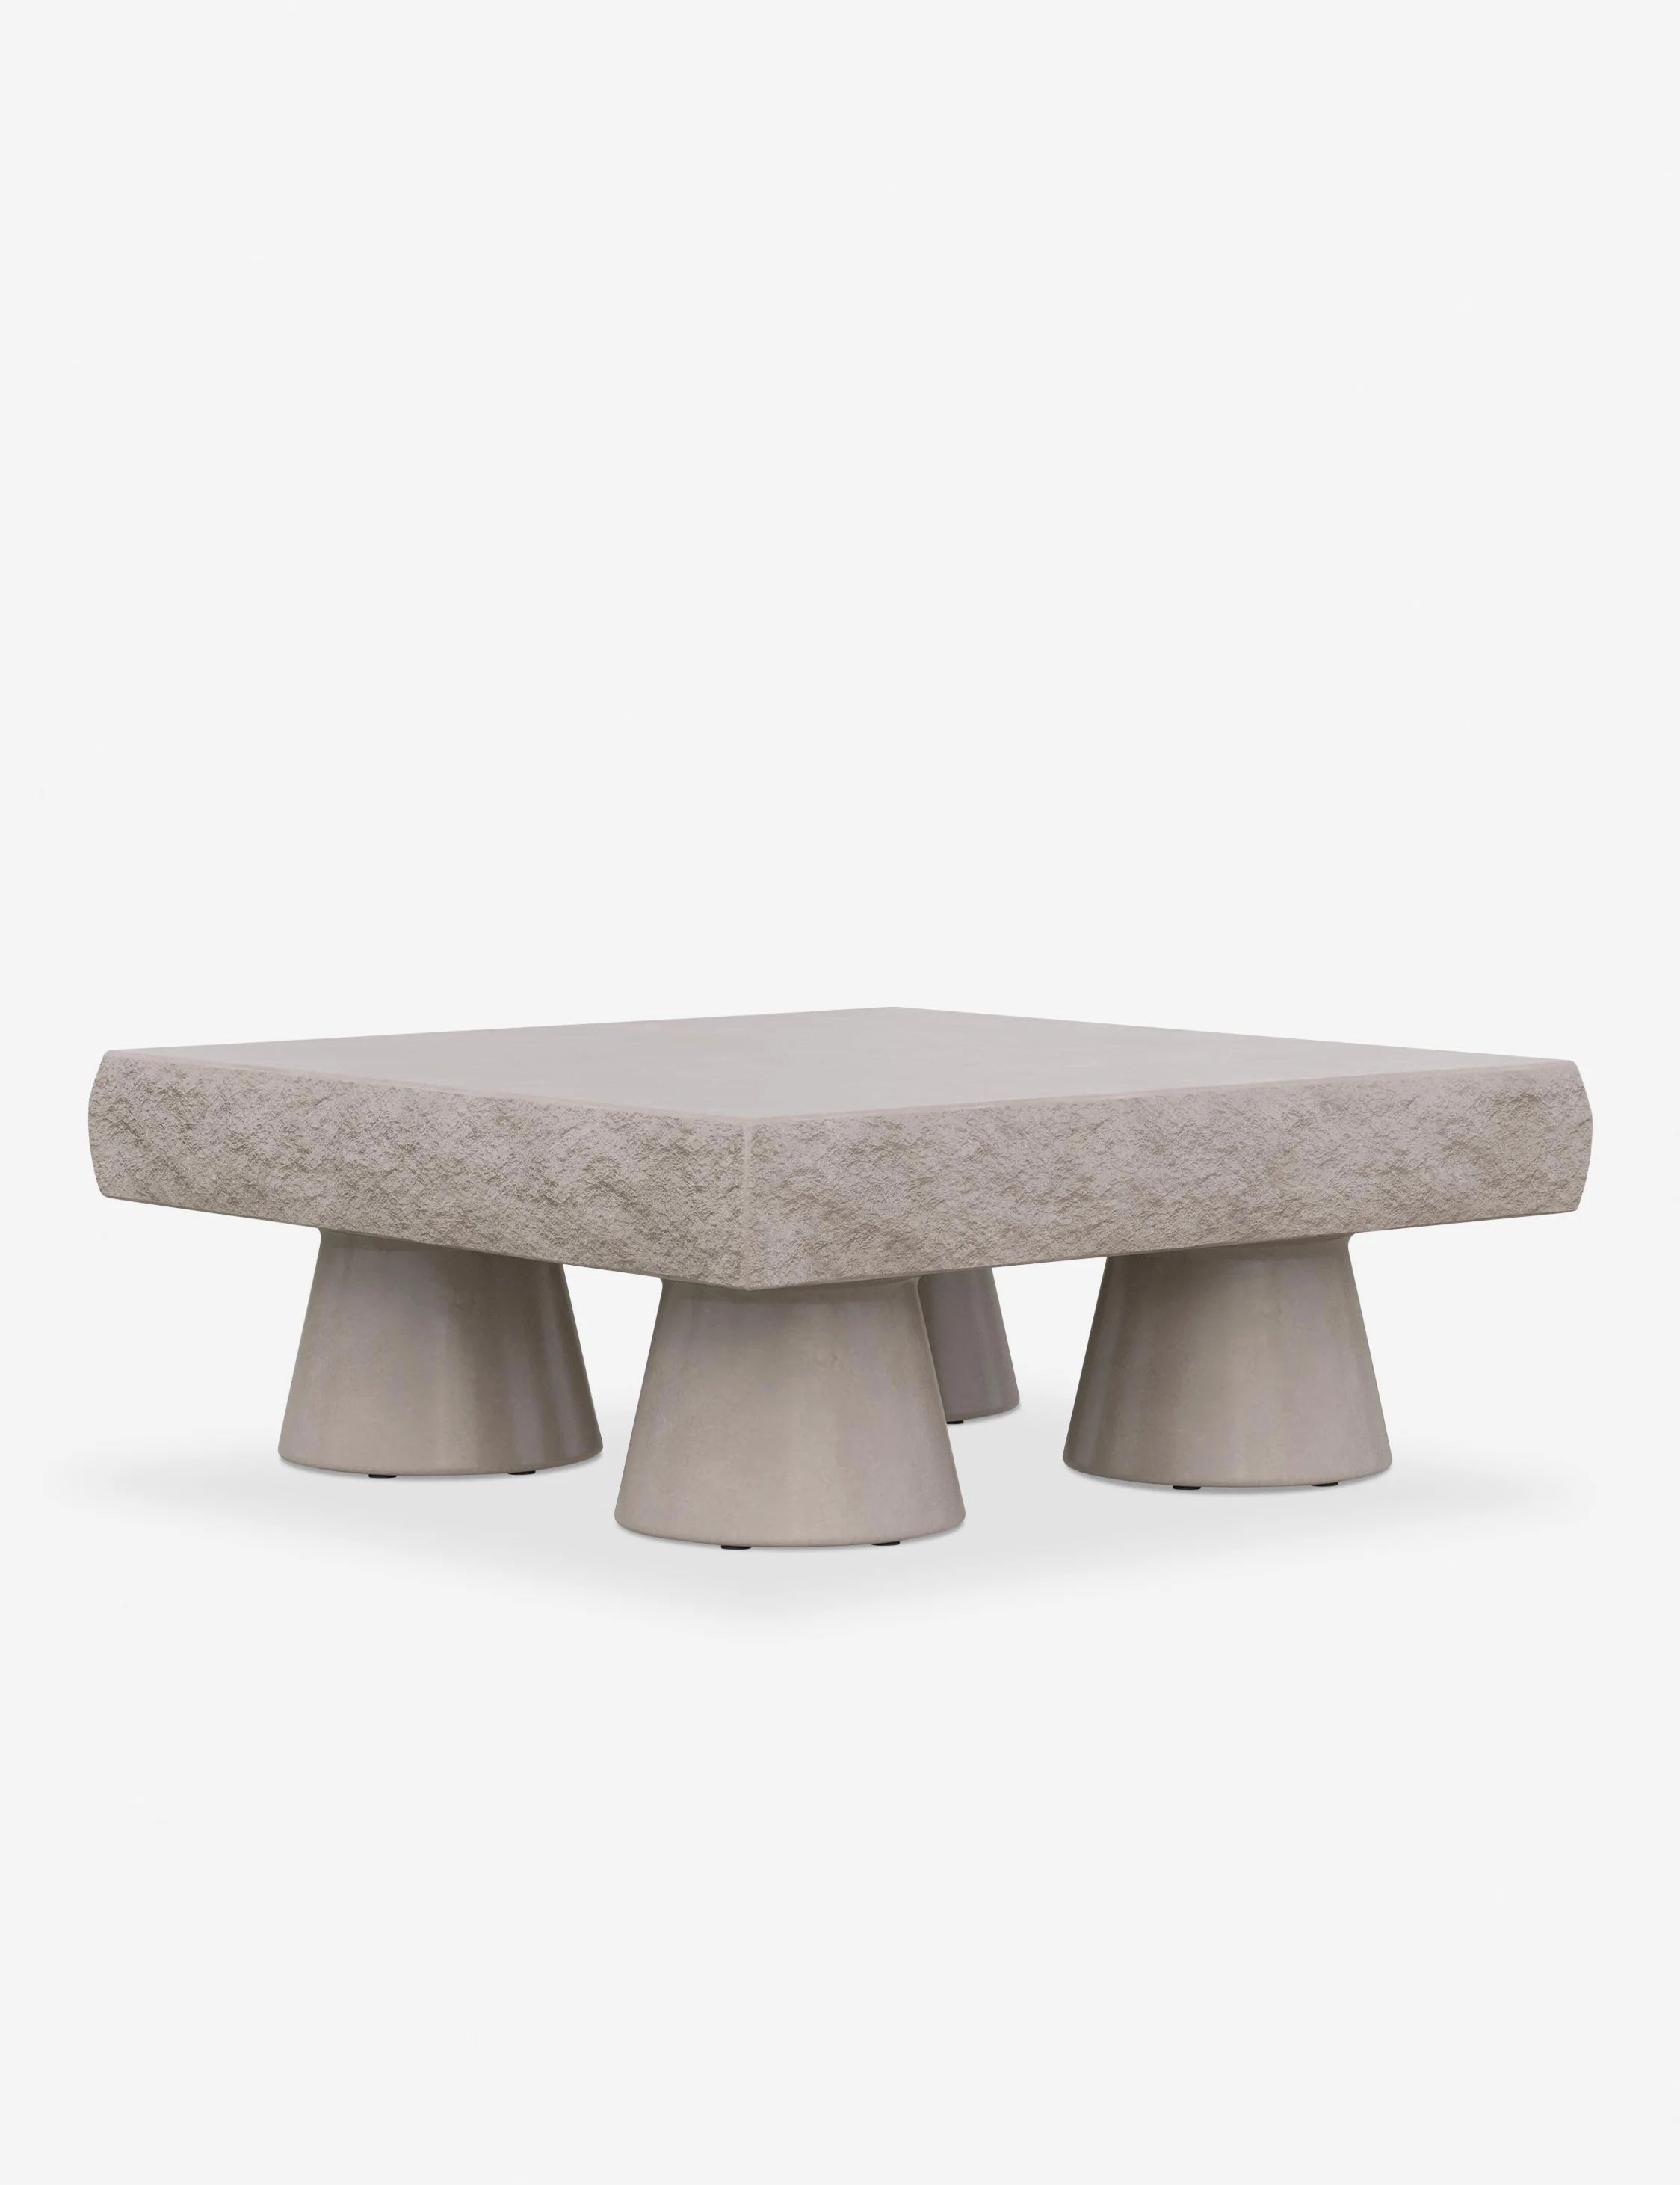 Lido Indoor / Outdoor Square Coffee Table | Lulu and Georgia 